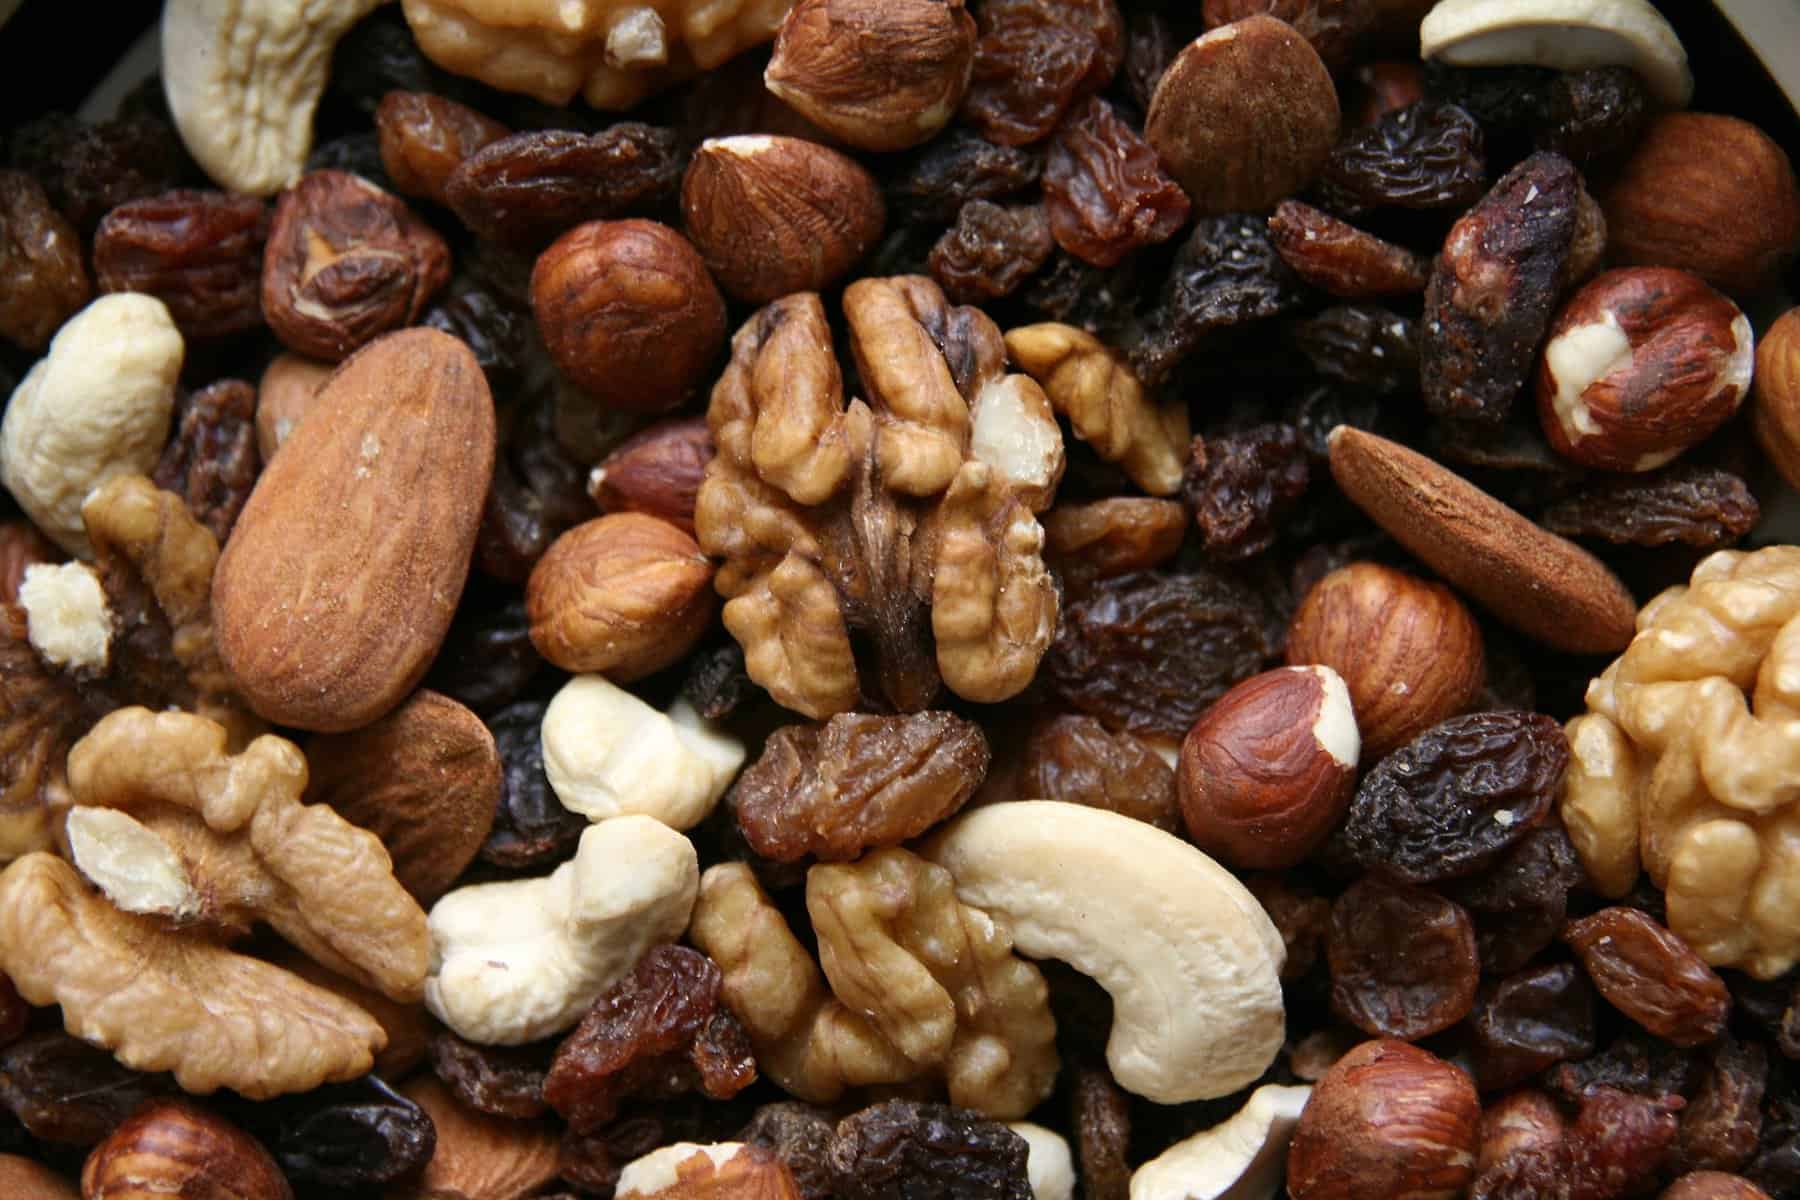 The best hiking snacks include nuts